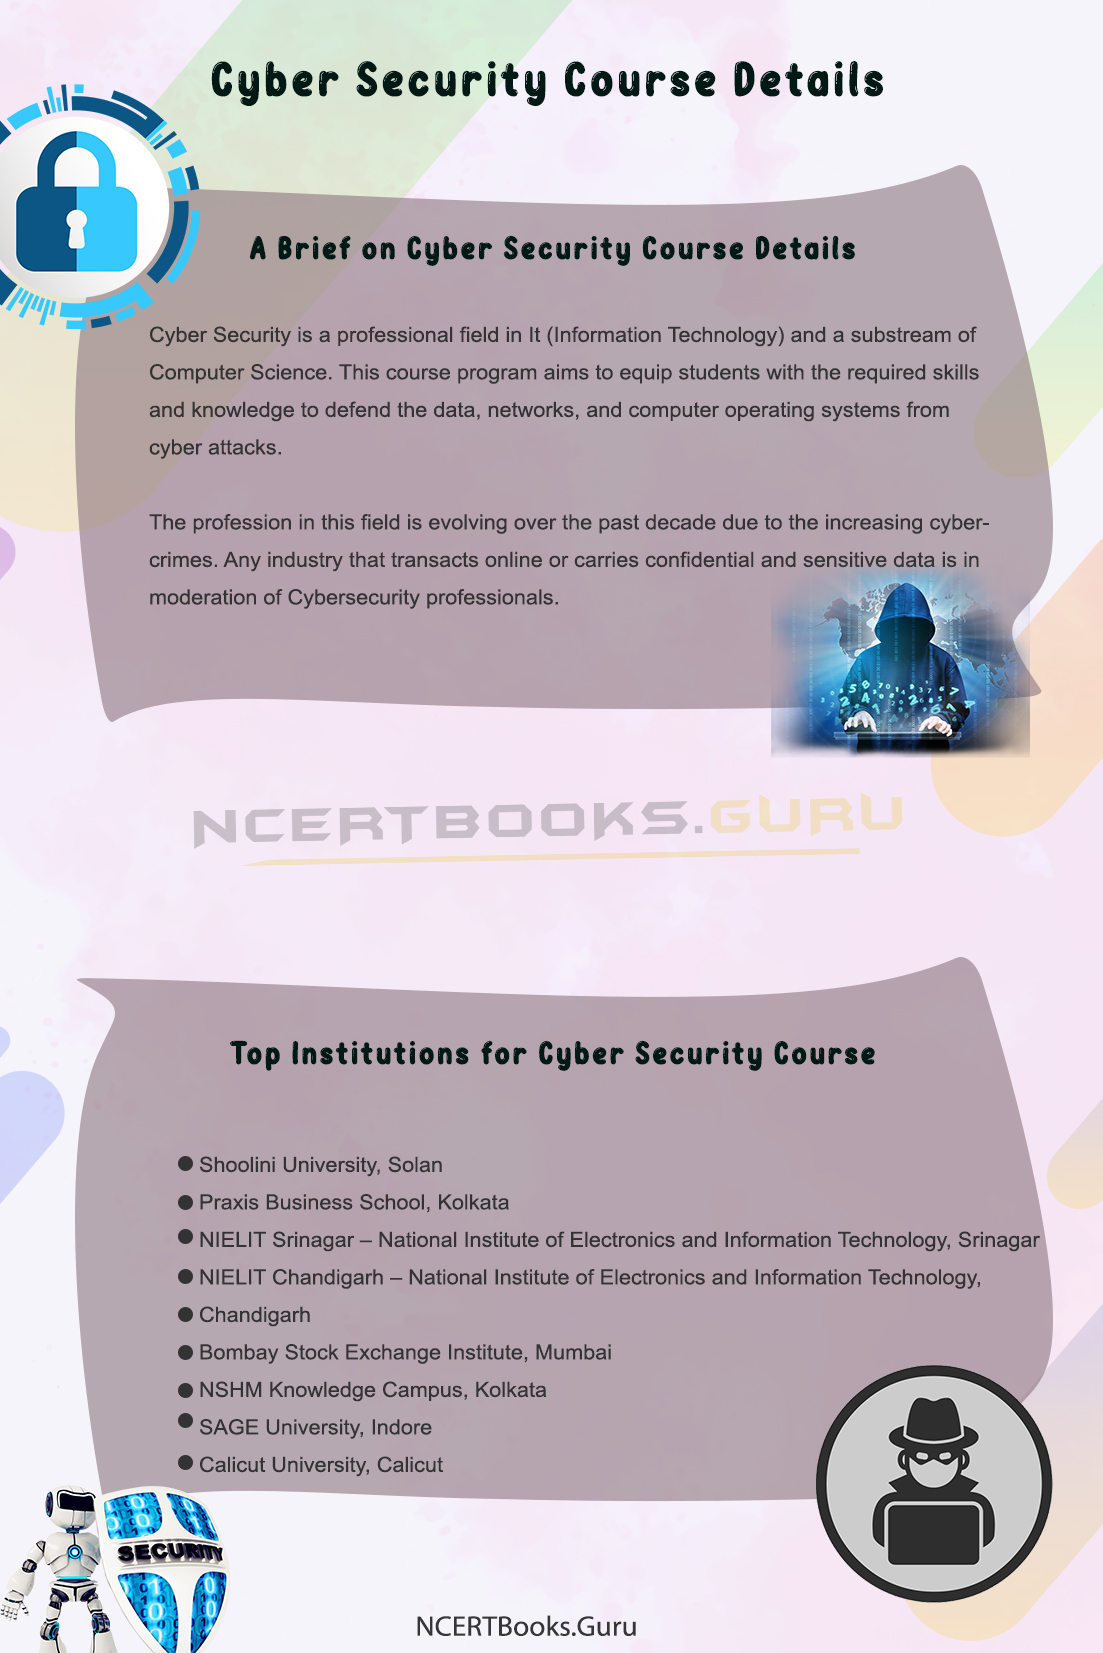 Cyber Security Course Details